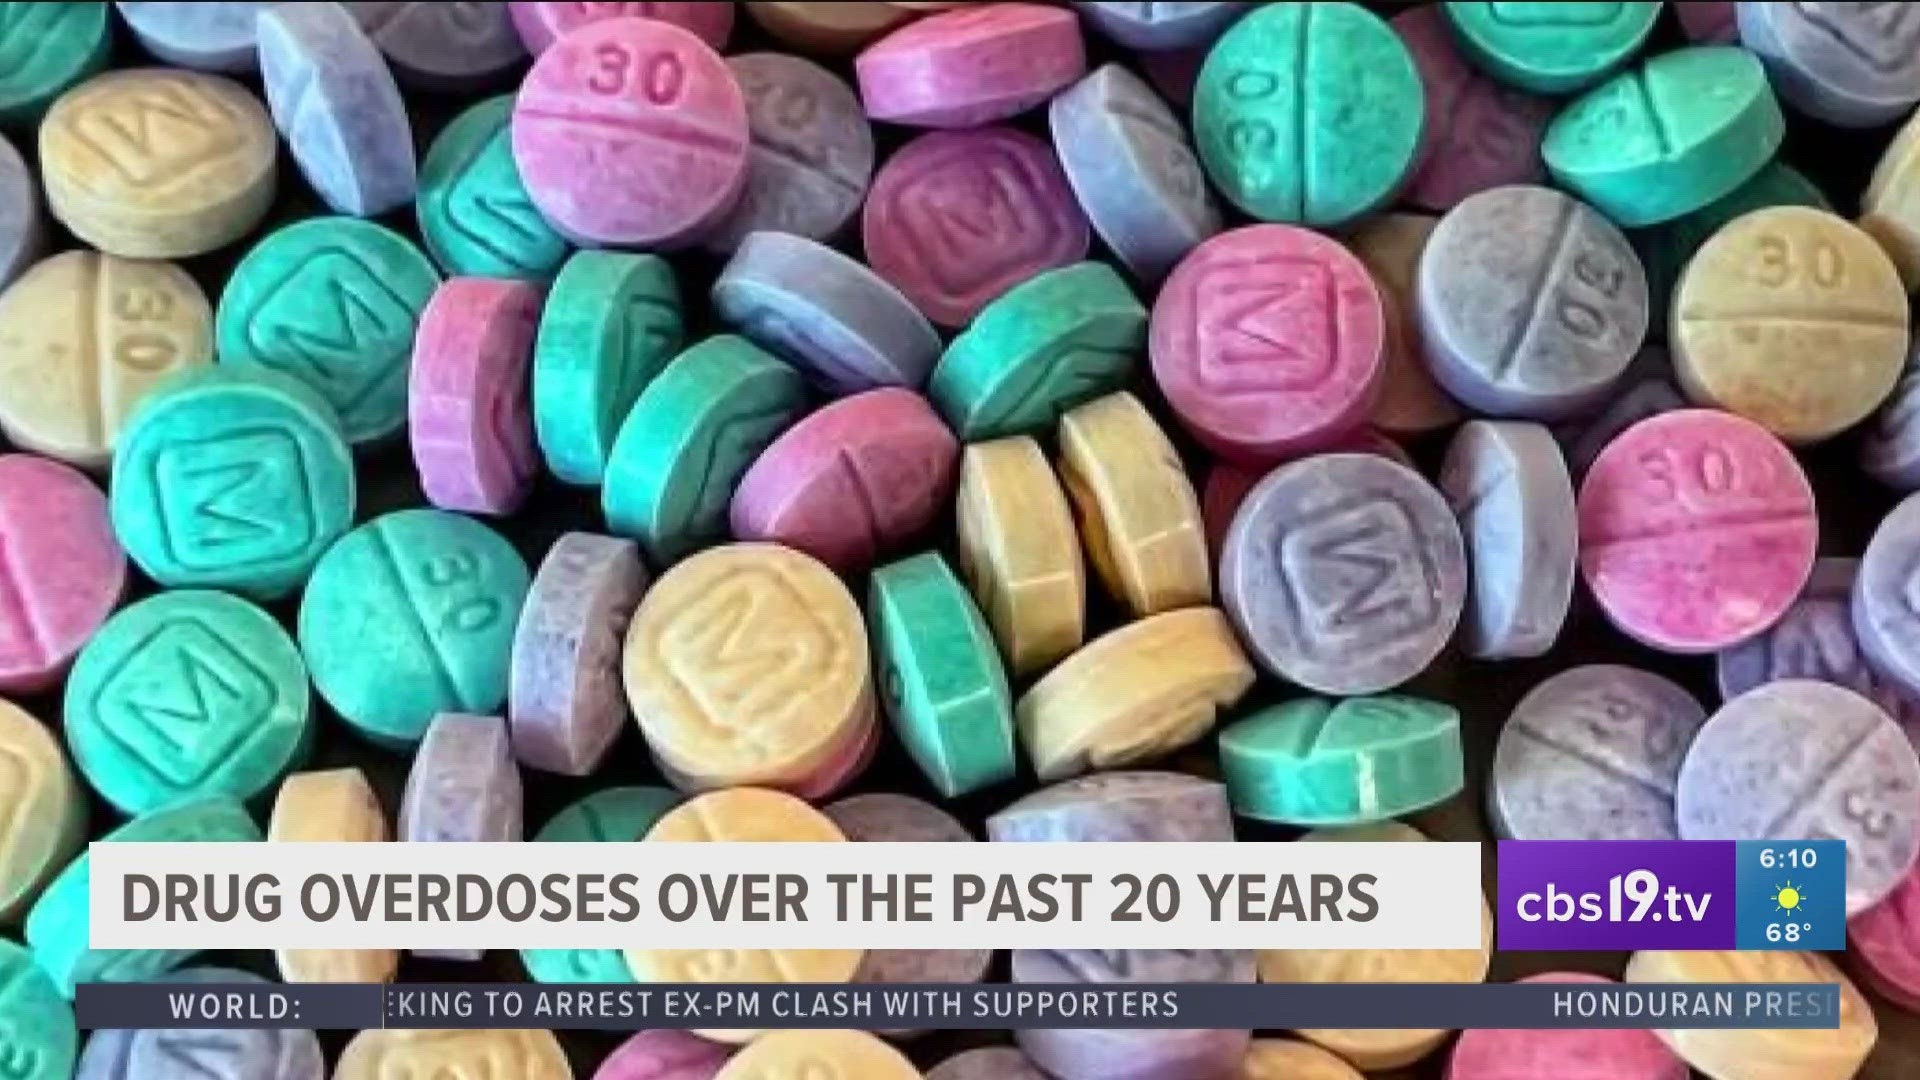 Drug overdoses over the past 20 years